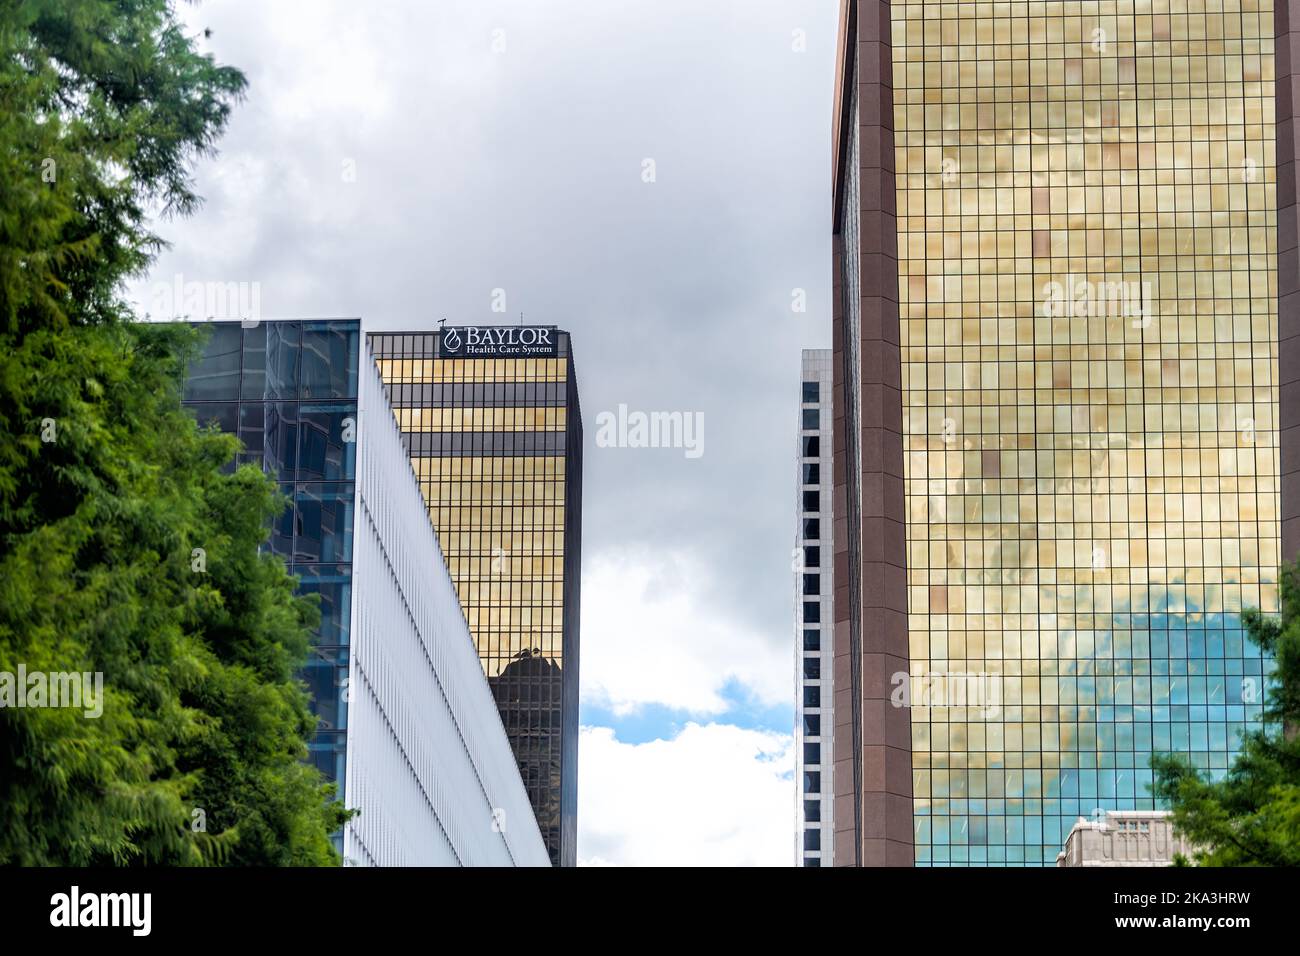 Dallas, USA - June 7, 2019: Downtown cityscape buildings in city with sign on modern architecture office for Baylor Health Care System for Medicine Stock Photo